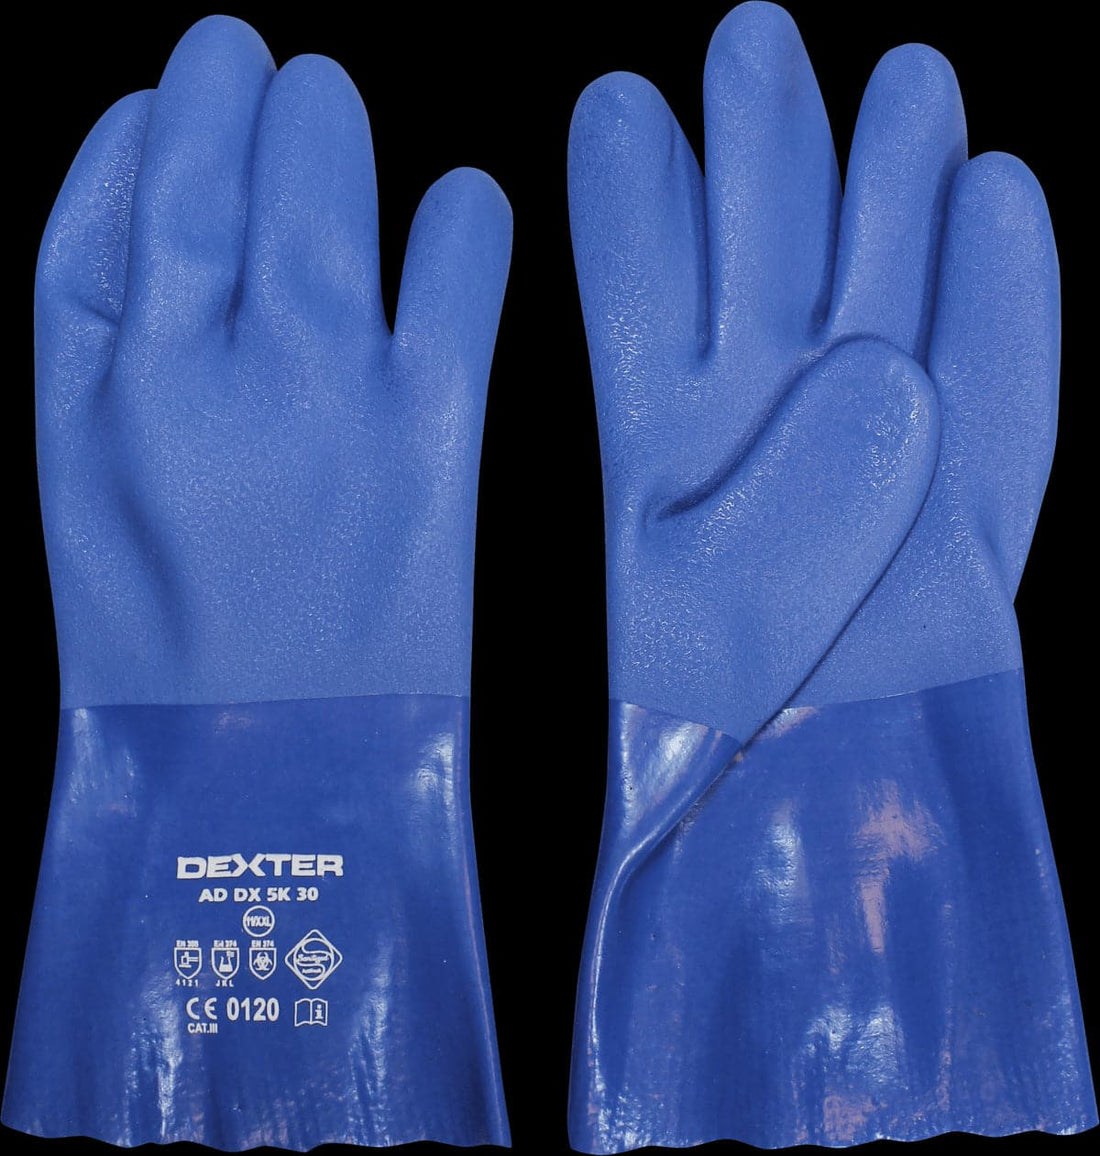 DEXTER LATEX GLOVES WITH PVC COATING, SIZE 9, L - best price from Maltashopper.com BR400001189